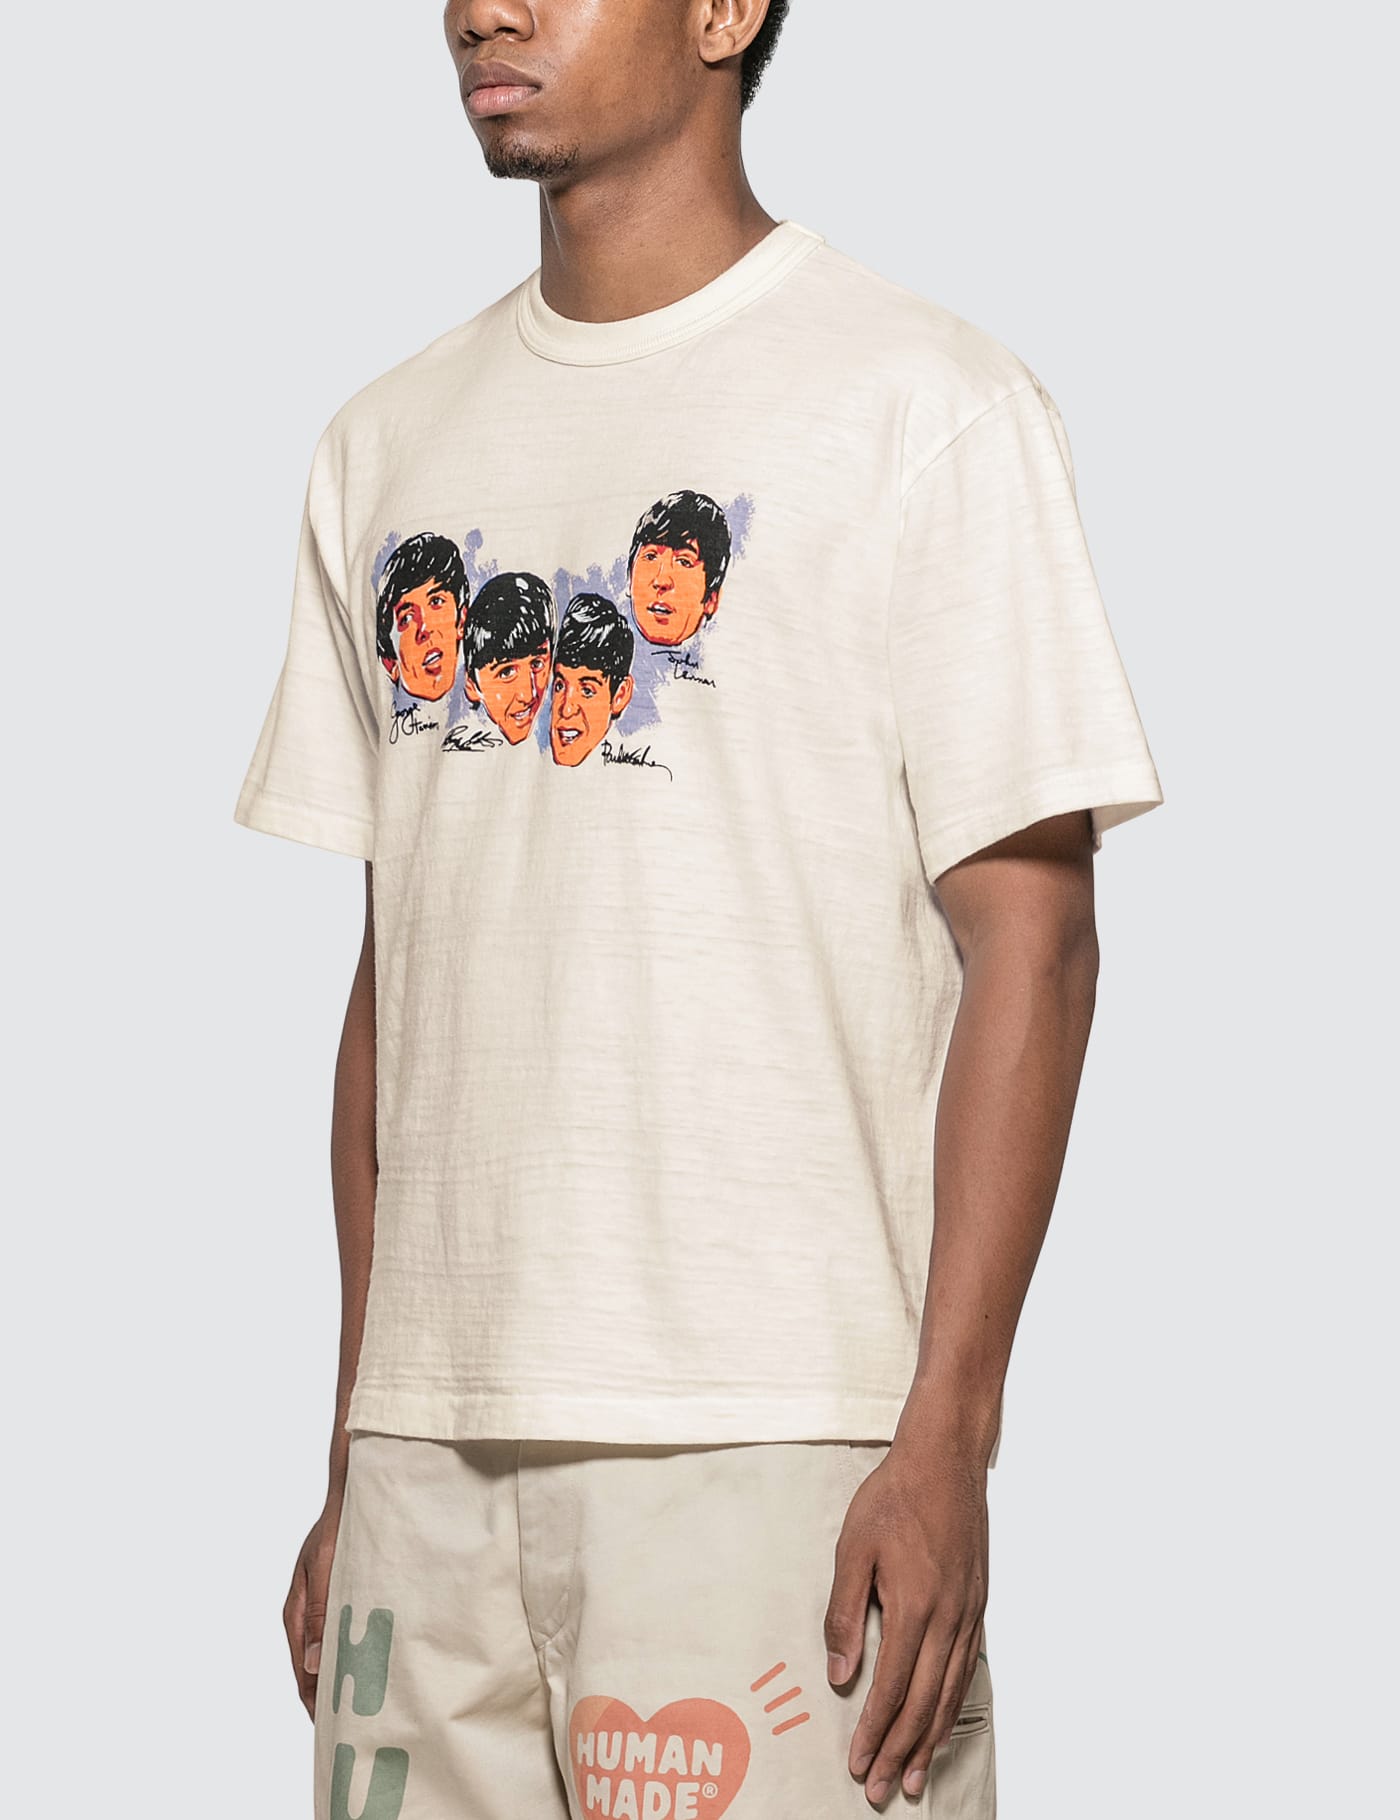 Human Made - Beatles T-Shirt | HBX - Globally Curated Fashion and 